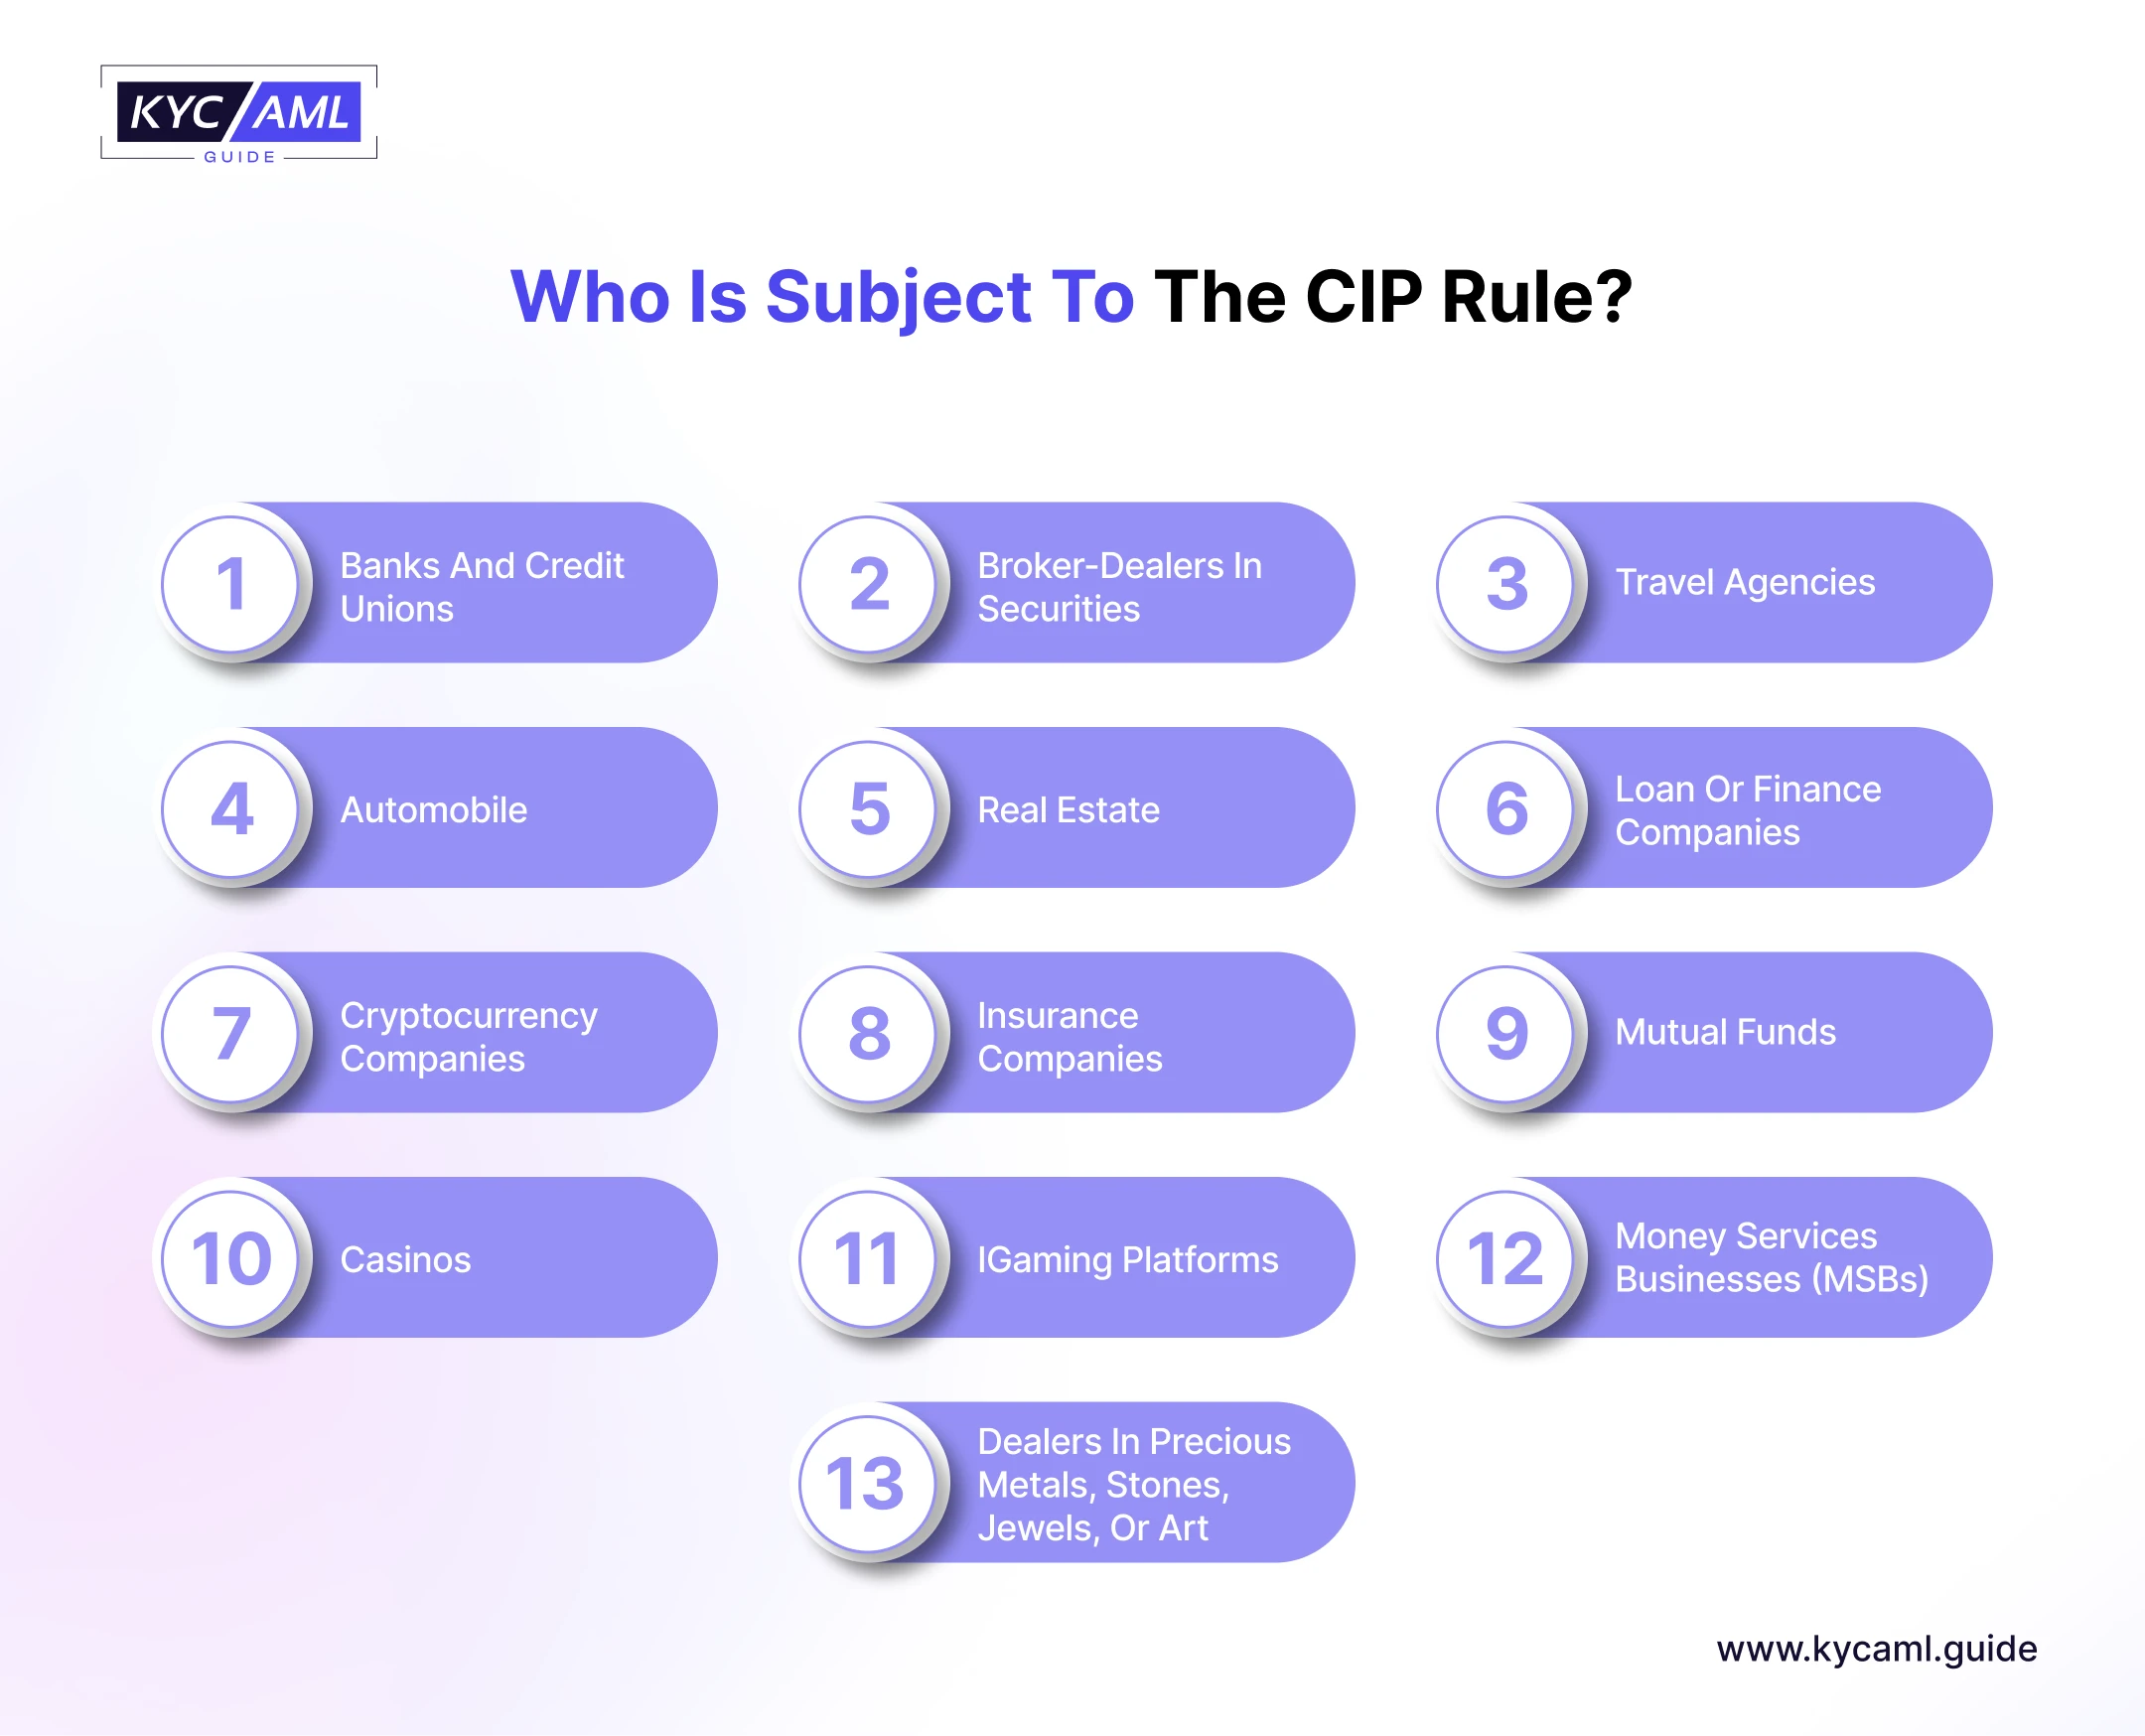 Difference Between CIP and KYC